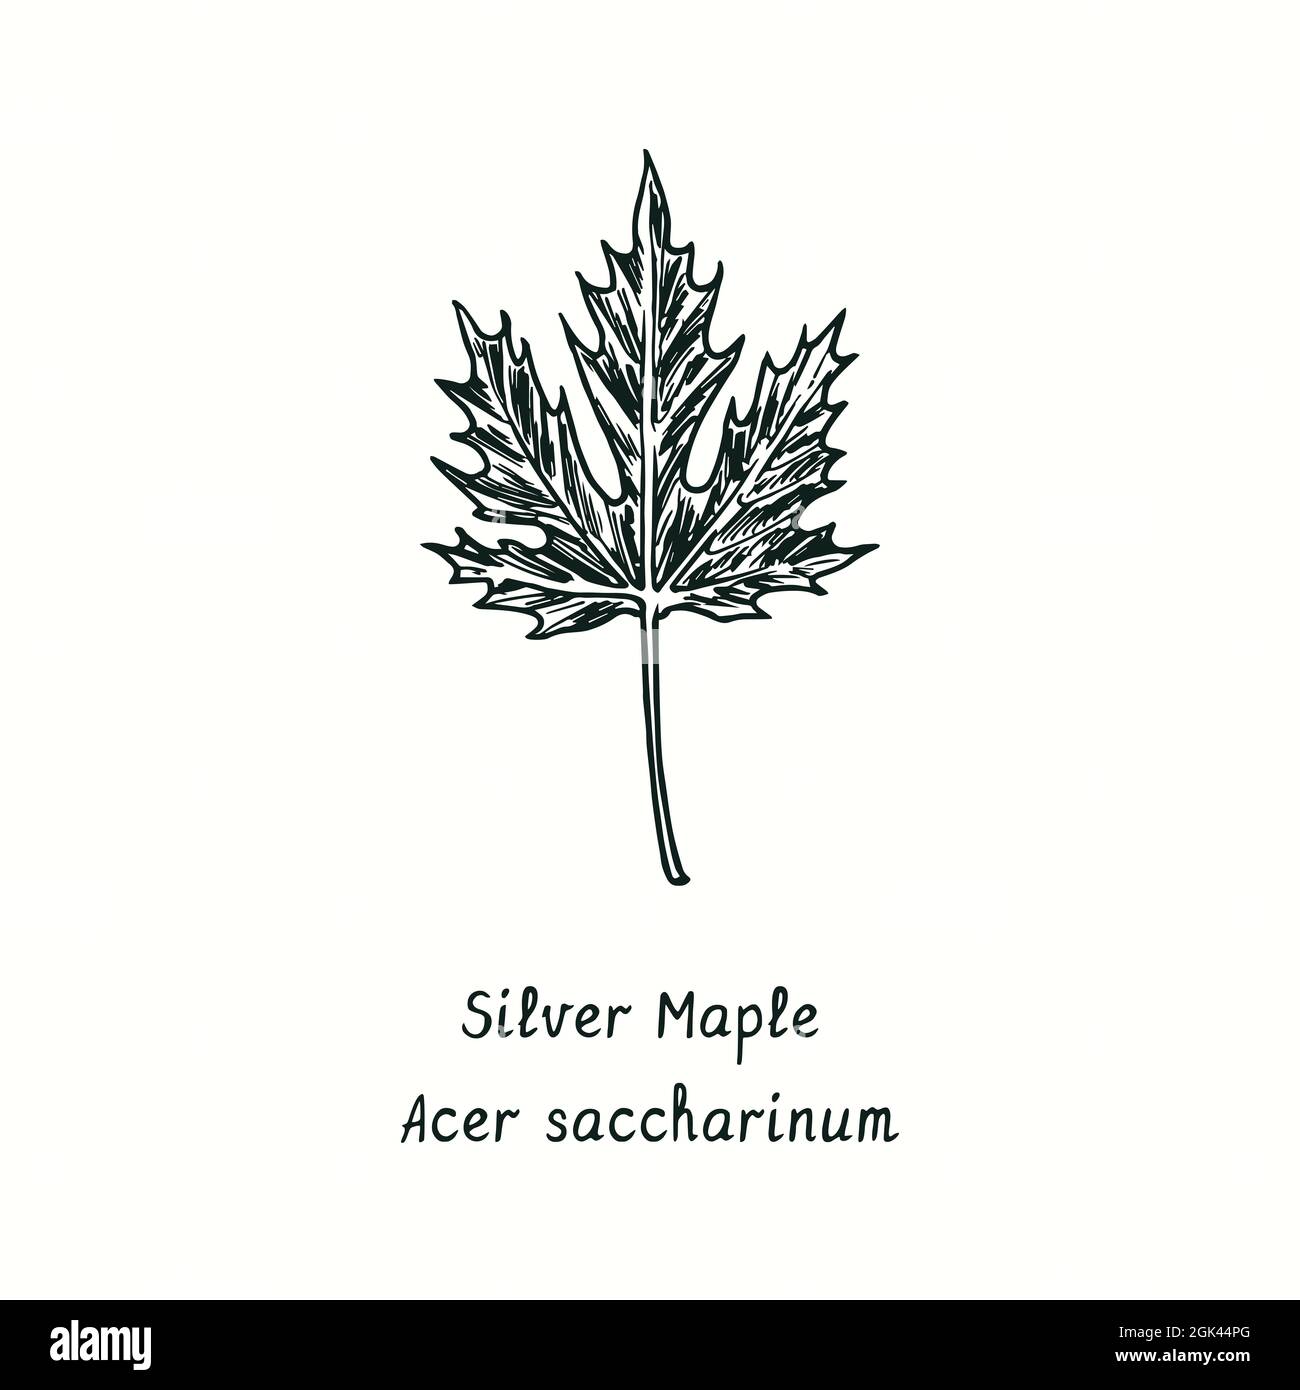 Silver Maple (Acer saccharinum) leaf. Ink black and white doodle drawing in woodcut style. Stock Photo